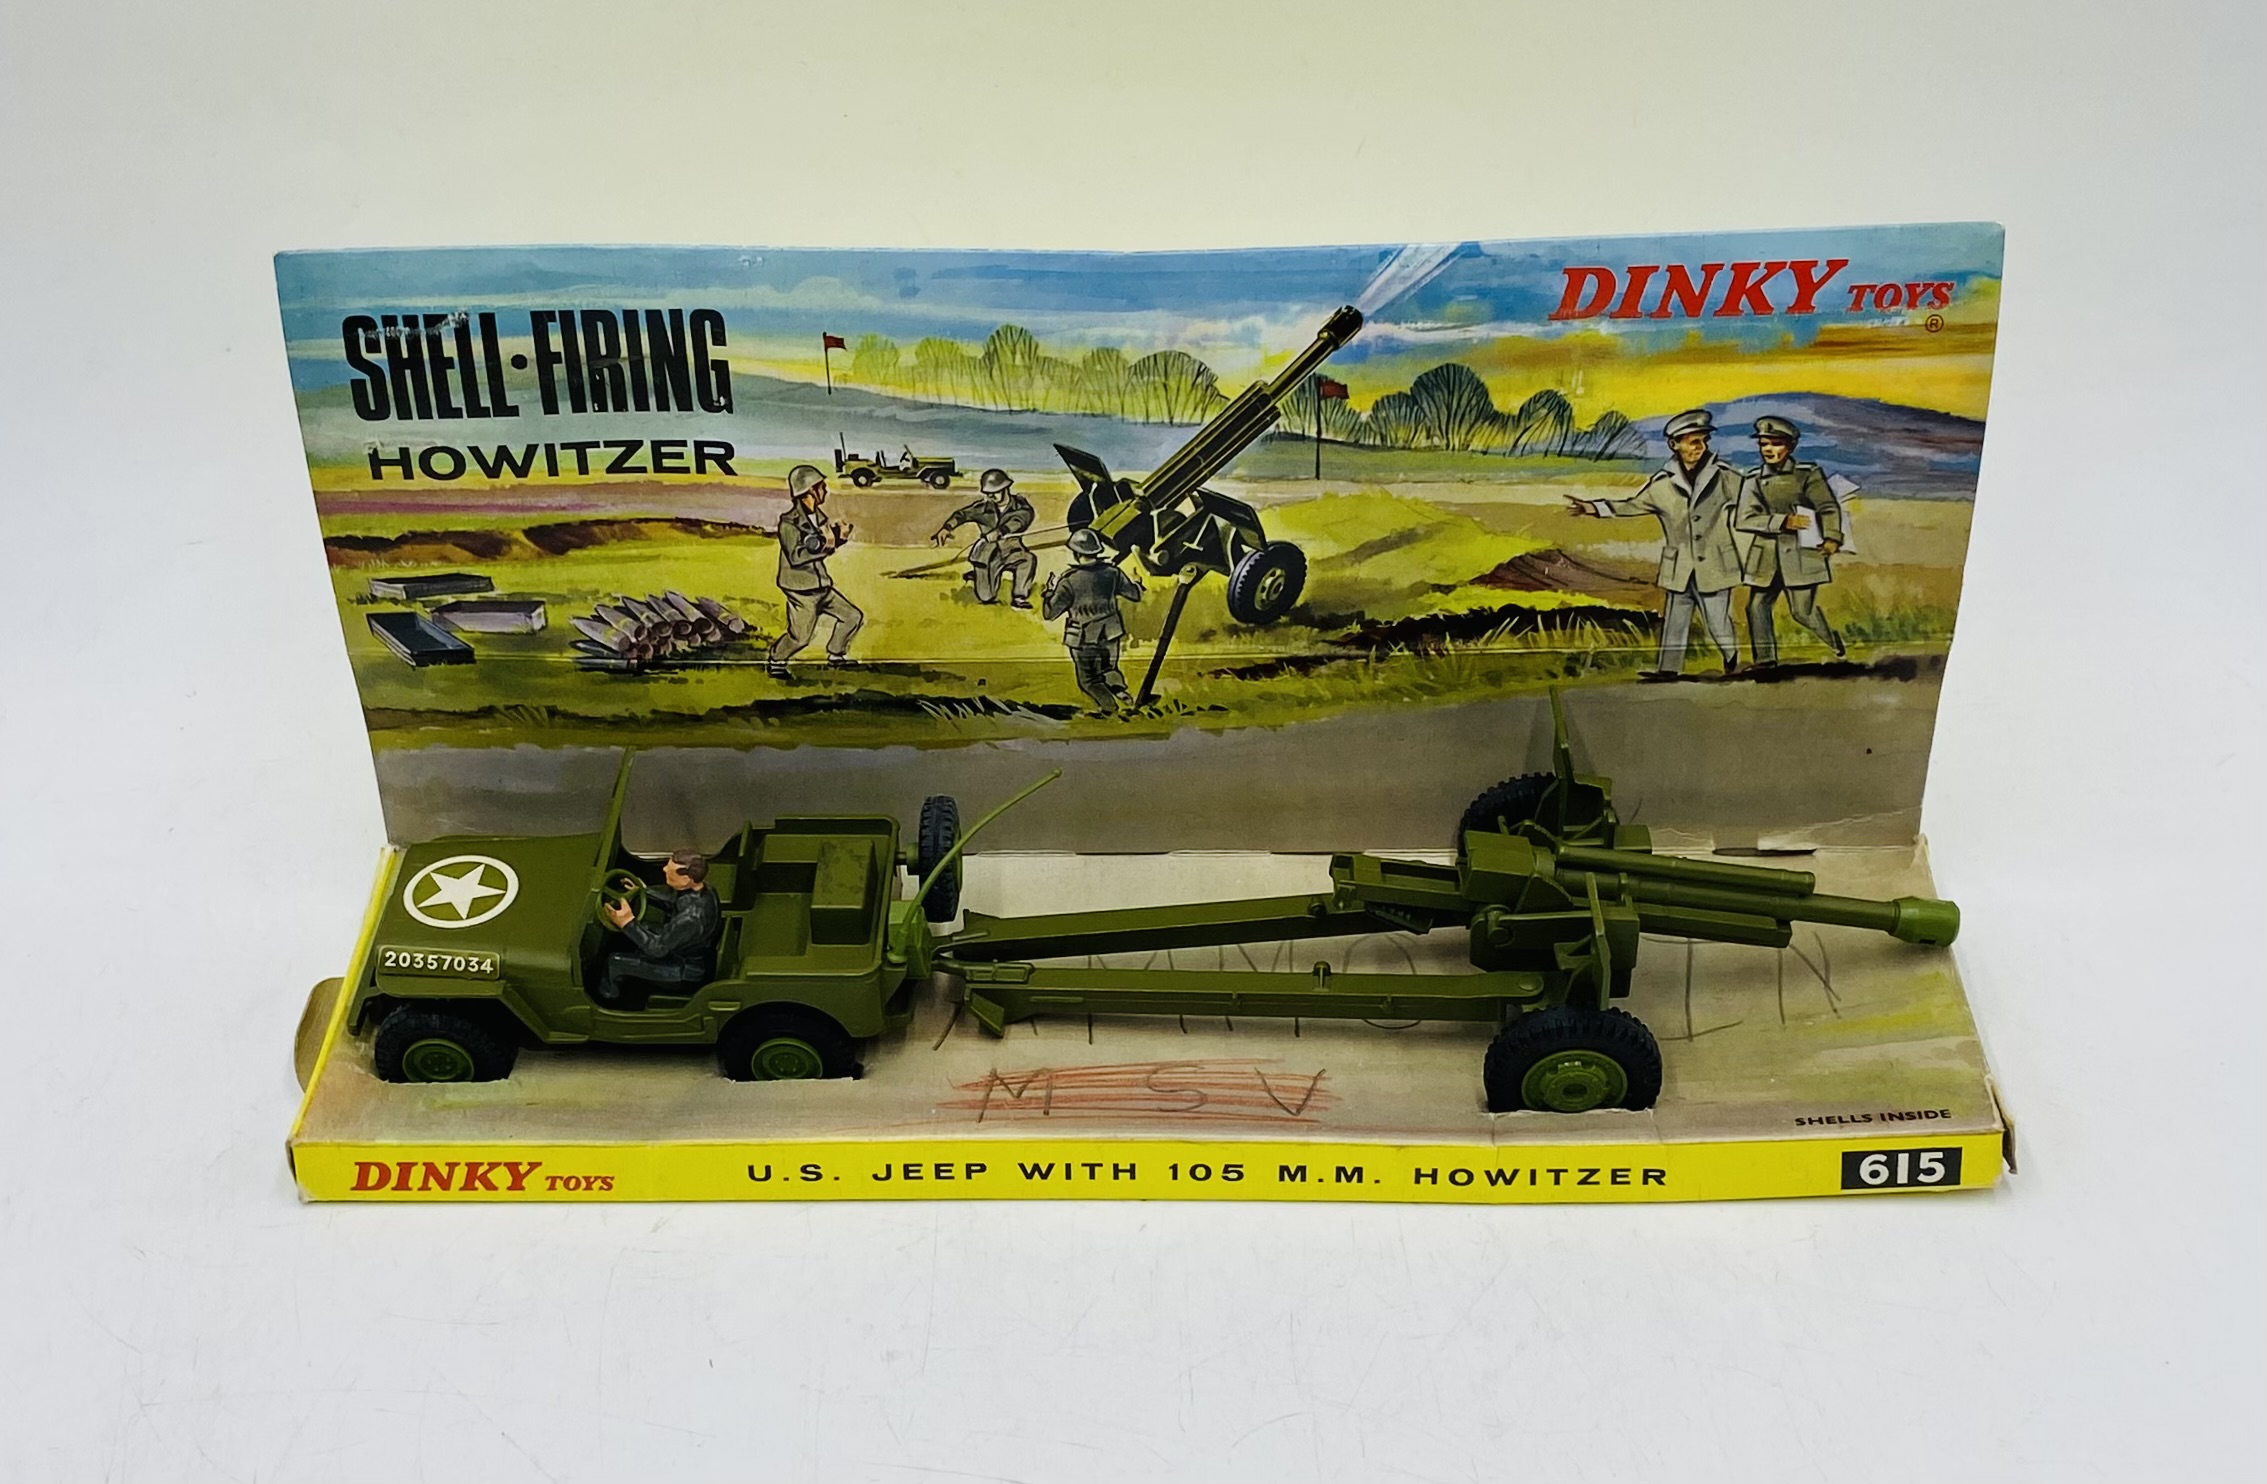 A vintage boxed Dinky Toys "U.S. Jeep with 105 MM Howitzer" with shell firing die-cast model (No - Image 2 of 10